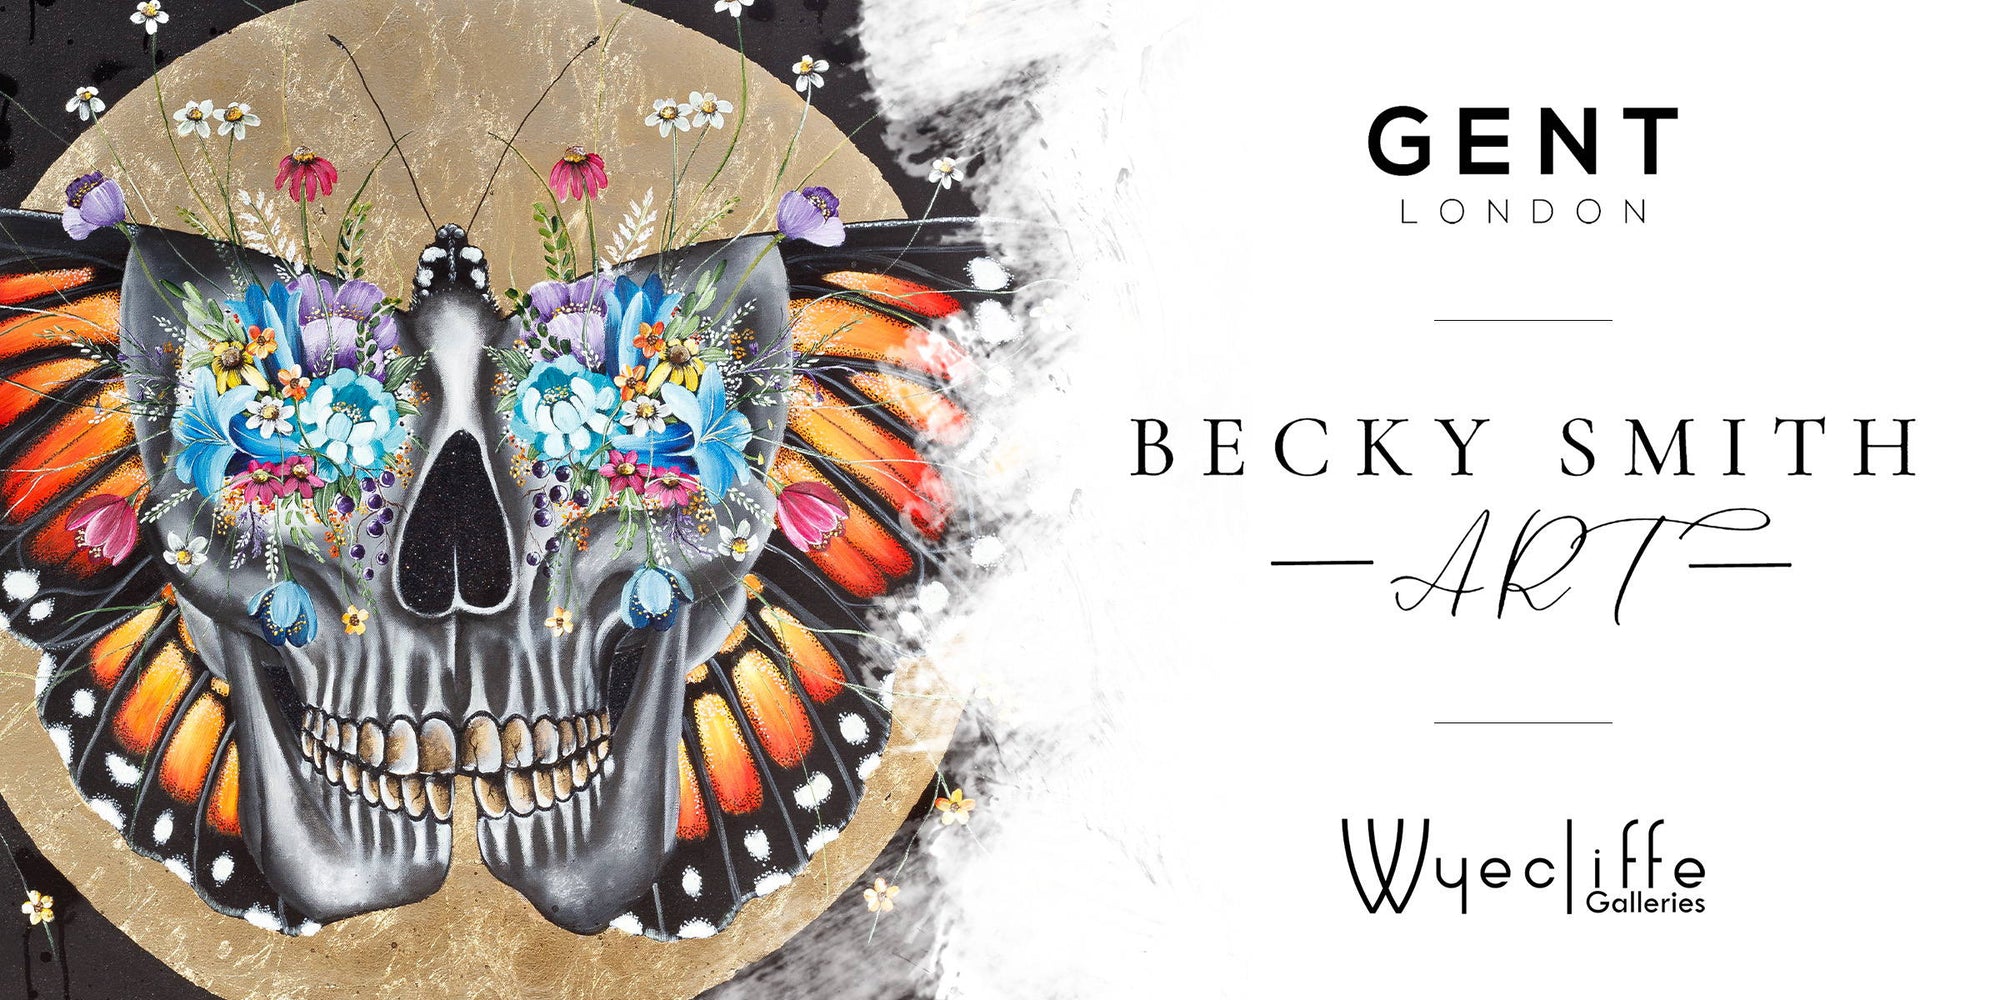 Becky Smith x GENT Collaboration Event